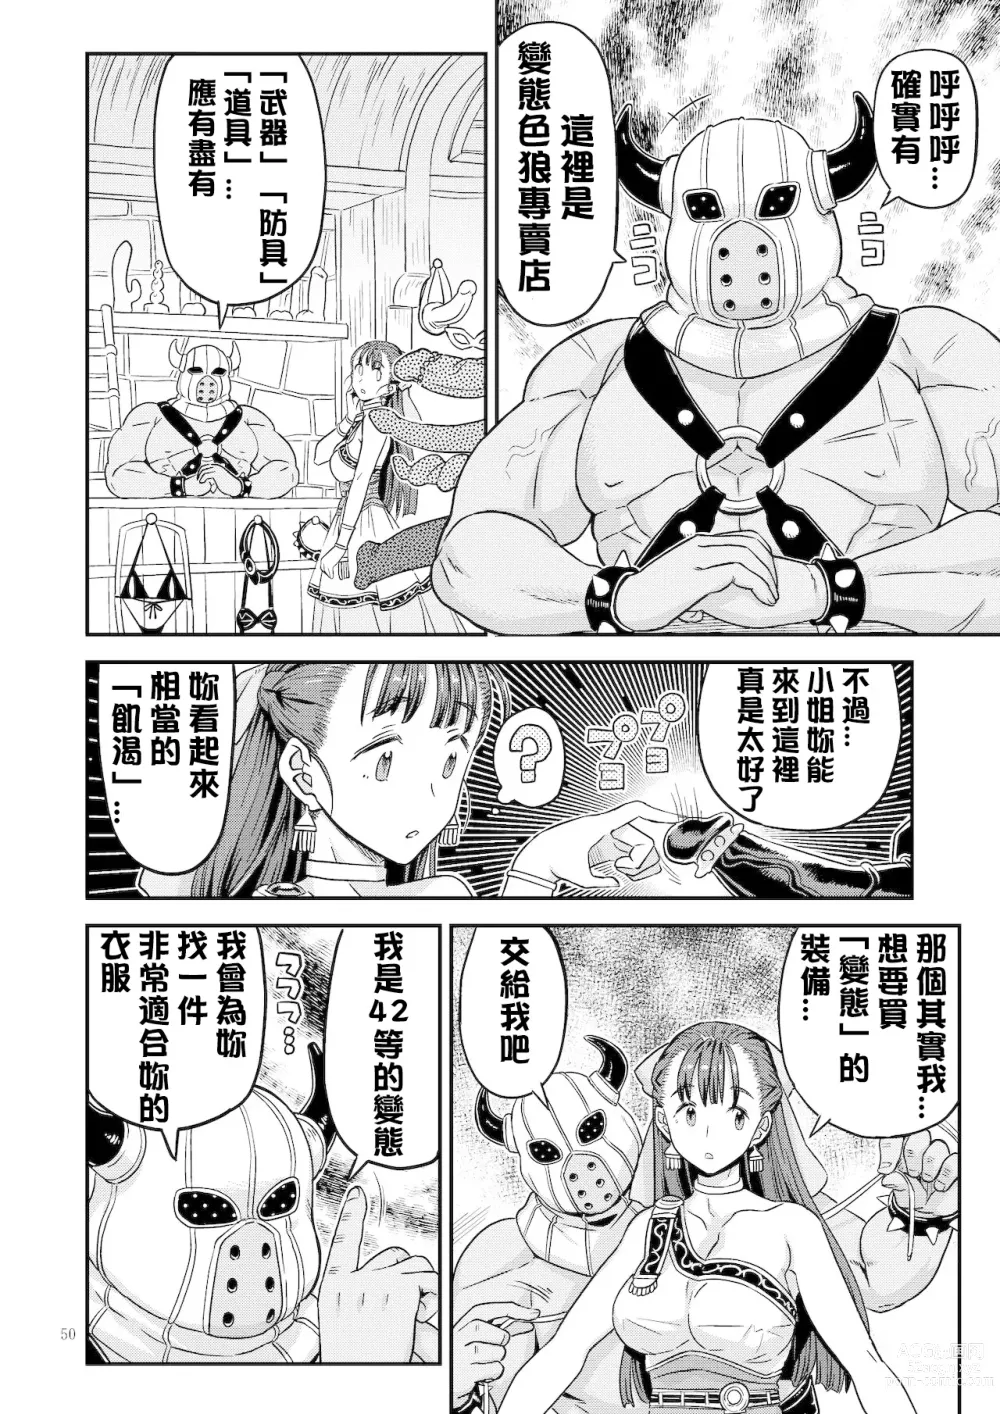 Page 7 of doujinshi Dragon Quest One Thousand and One Nights (Dragon Quest) [Digital]  【Chinese】【QTE中文翻譯】